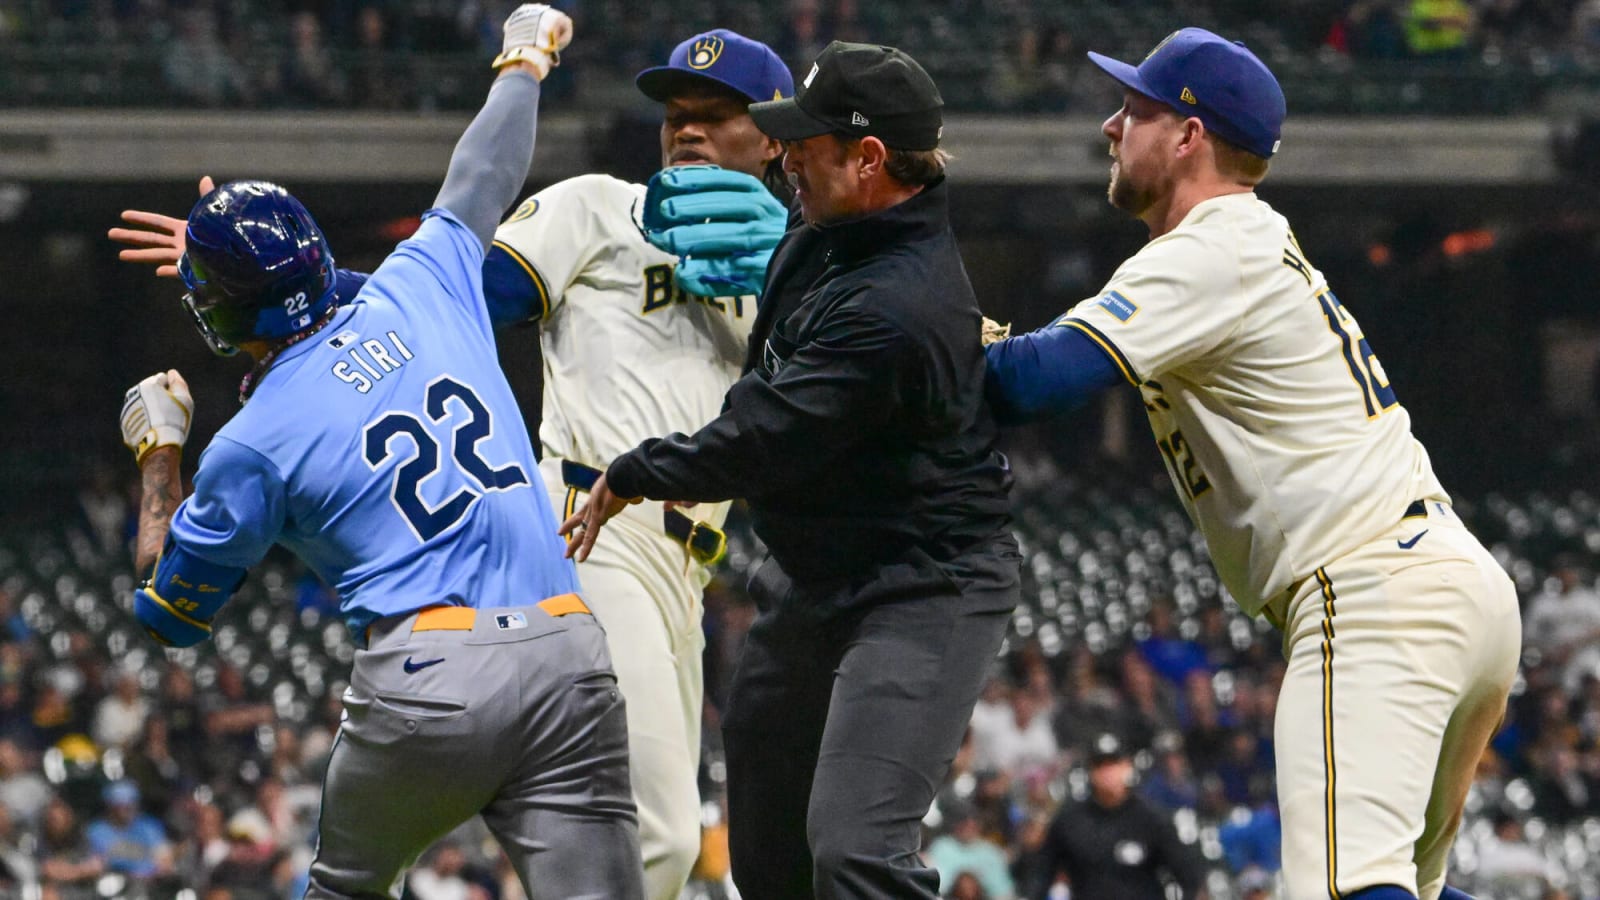 Watch: Benches clear in Brewers-Rays game as Abner Uribe and Jose Siri throw punches in heated altercation